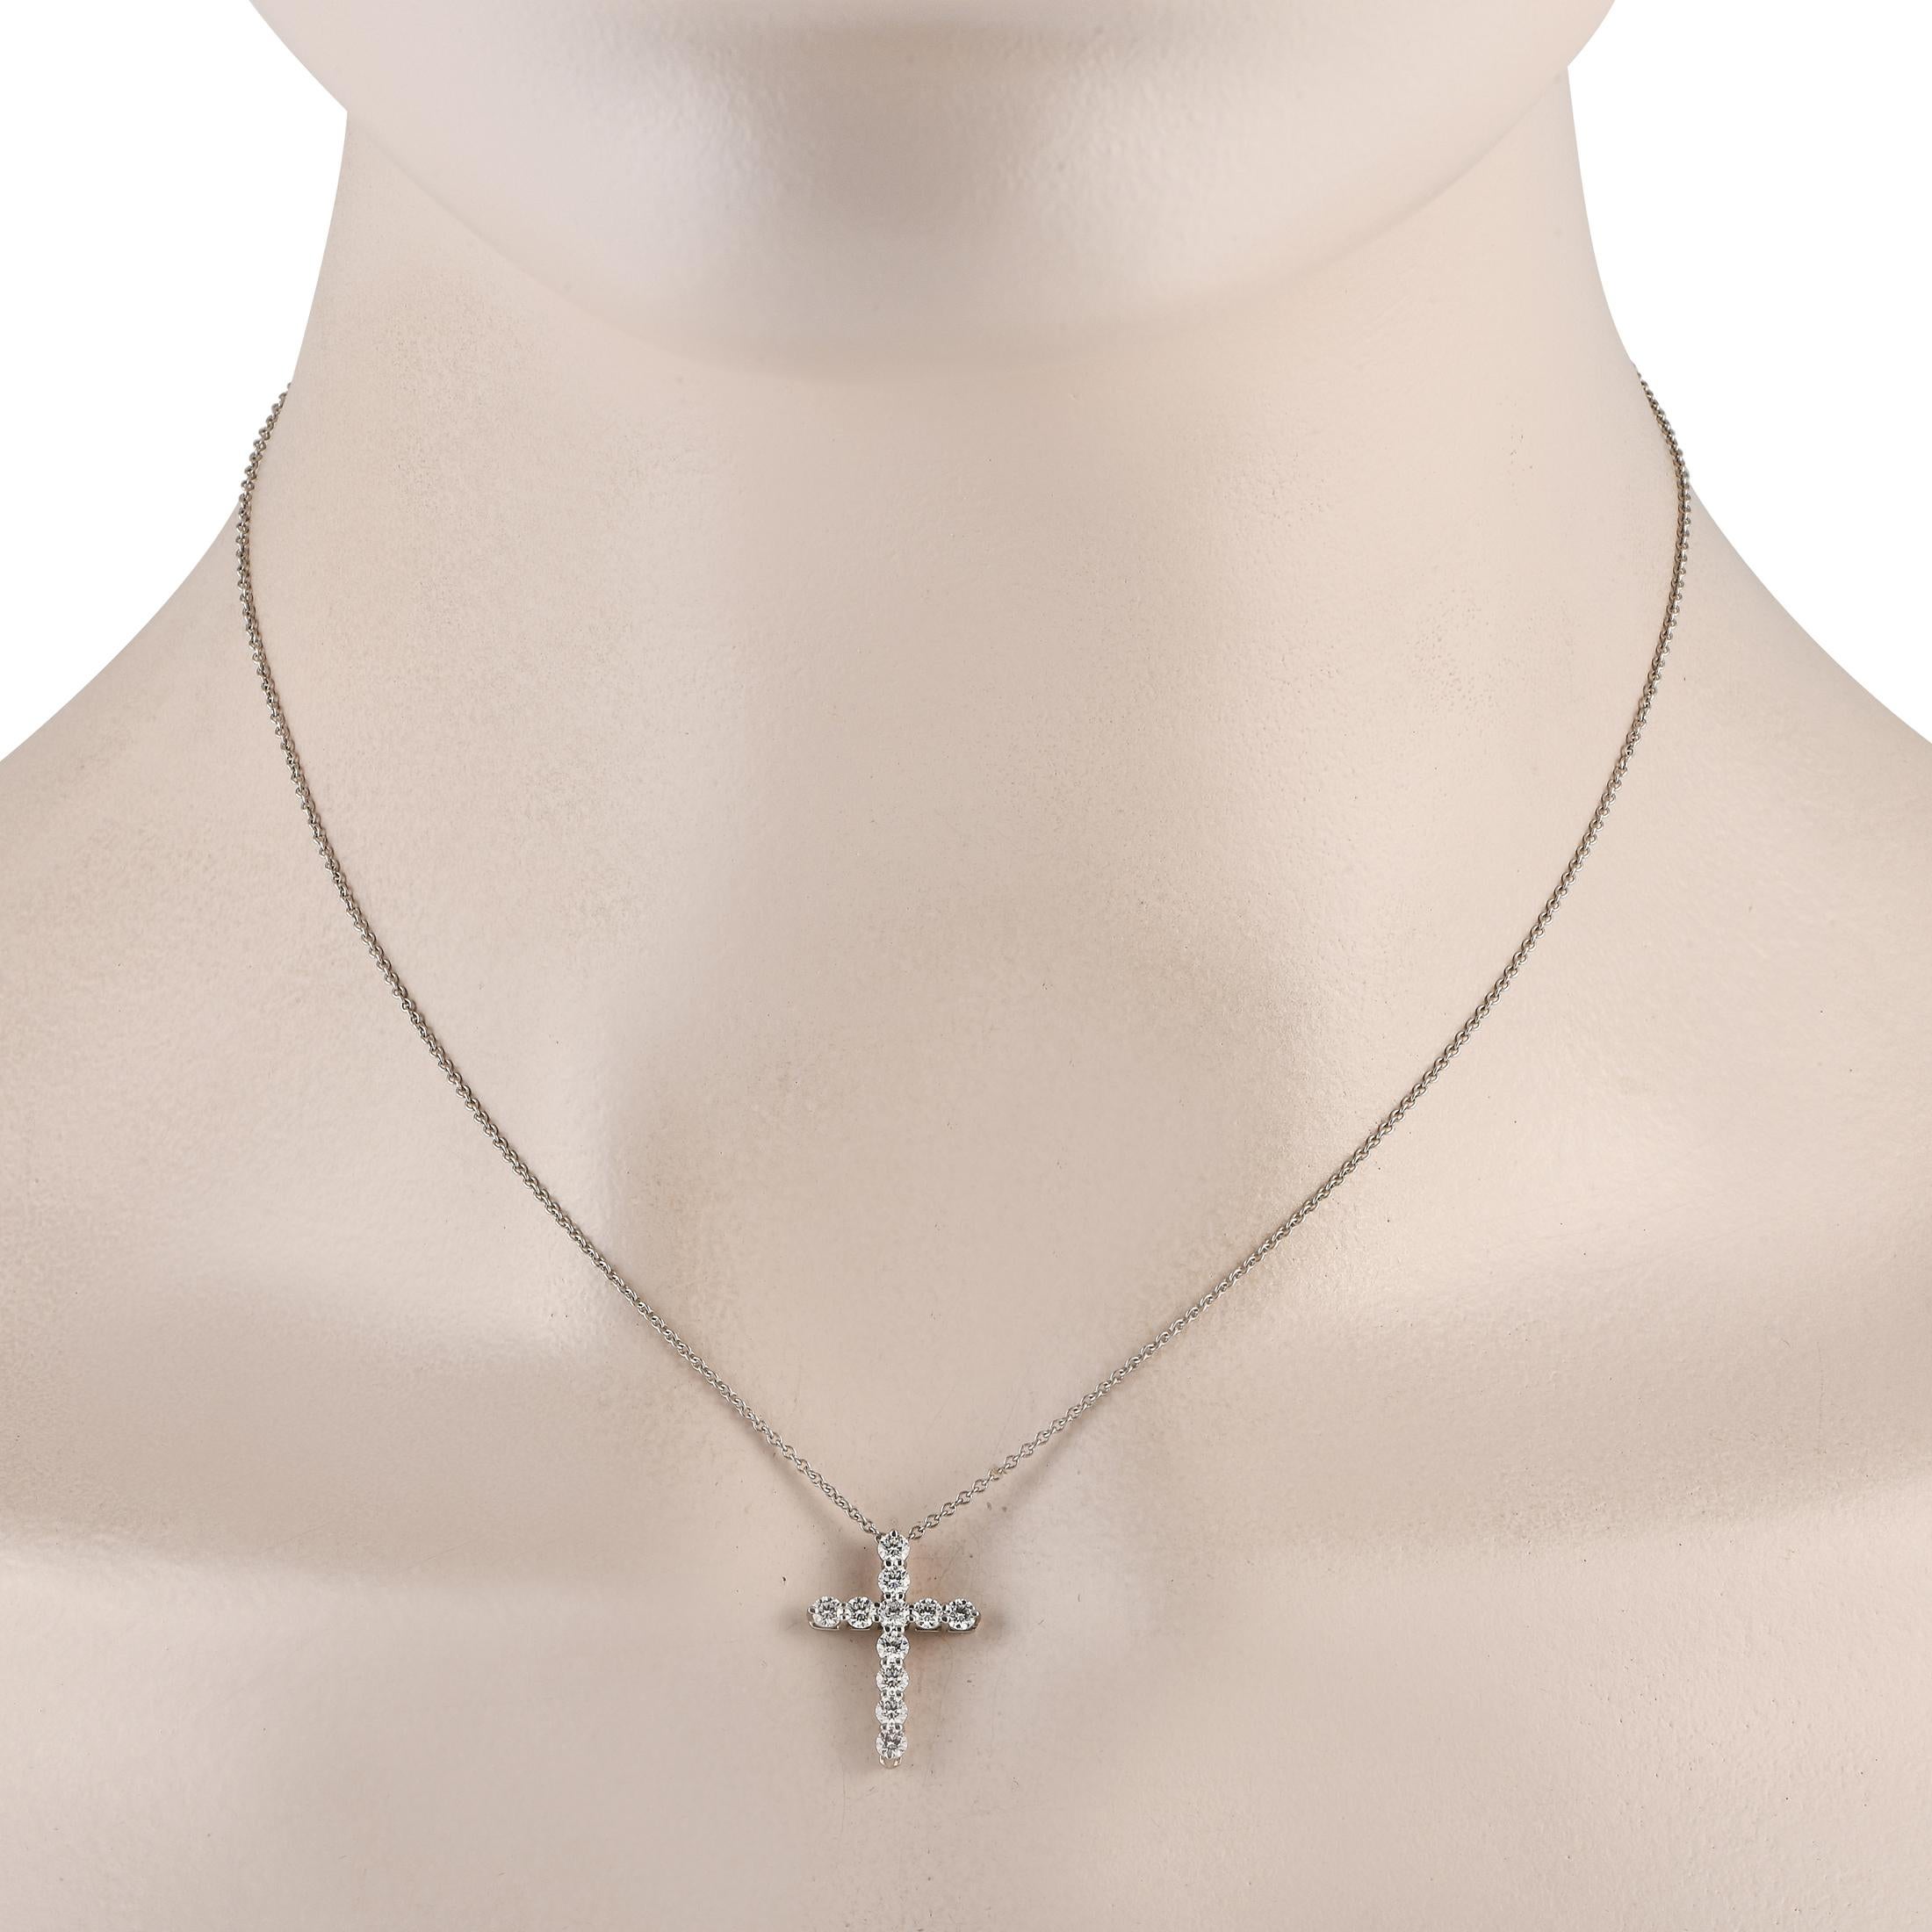 Proudly express your faith with this glittering cross necklace in platinum. From Tiffany & Co's Jazz Collection, this piece features a 0.75